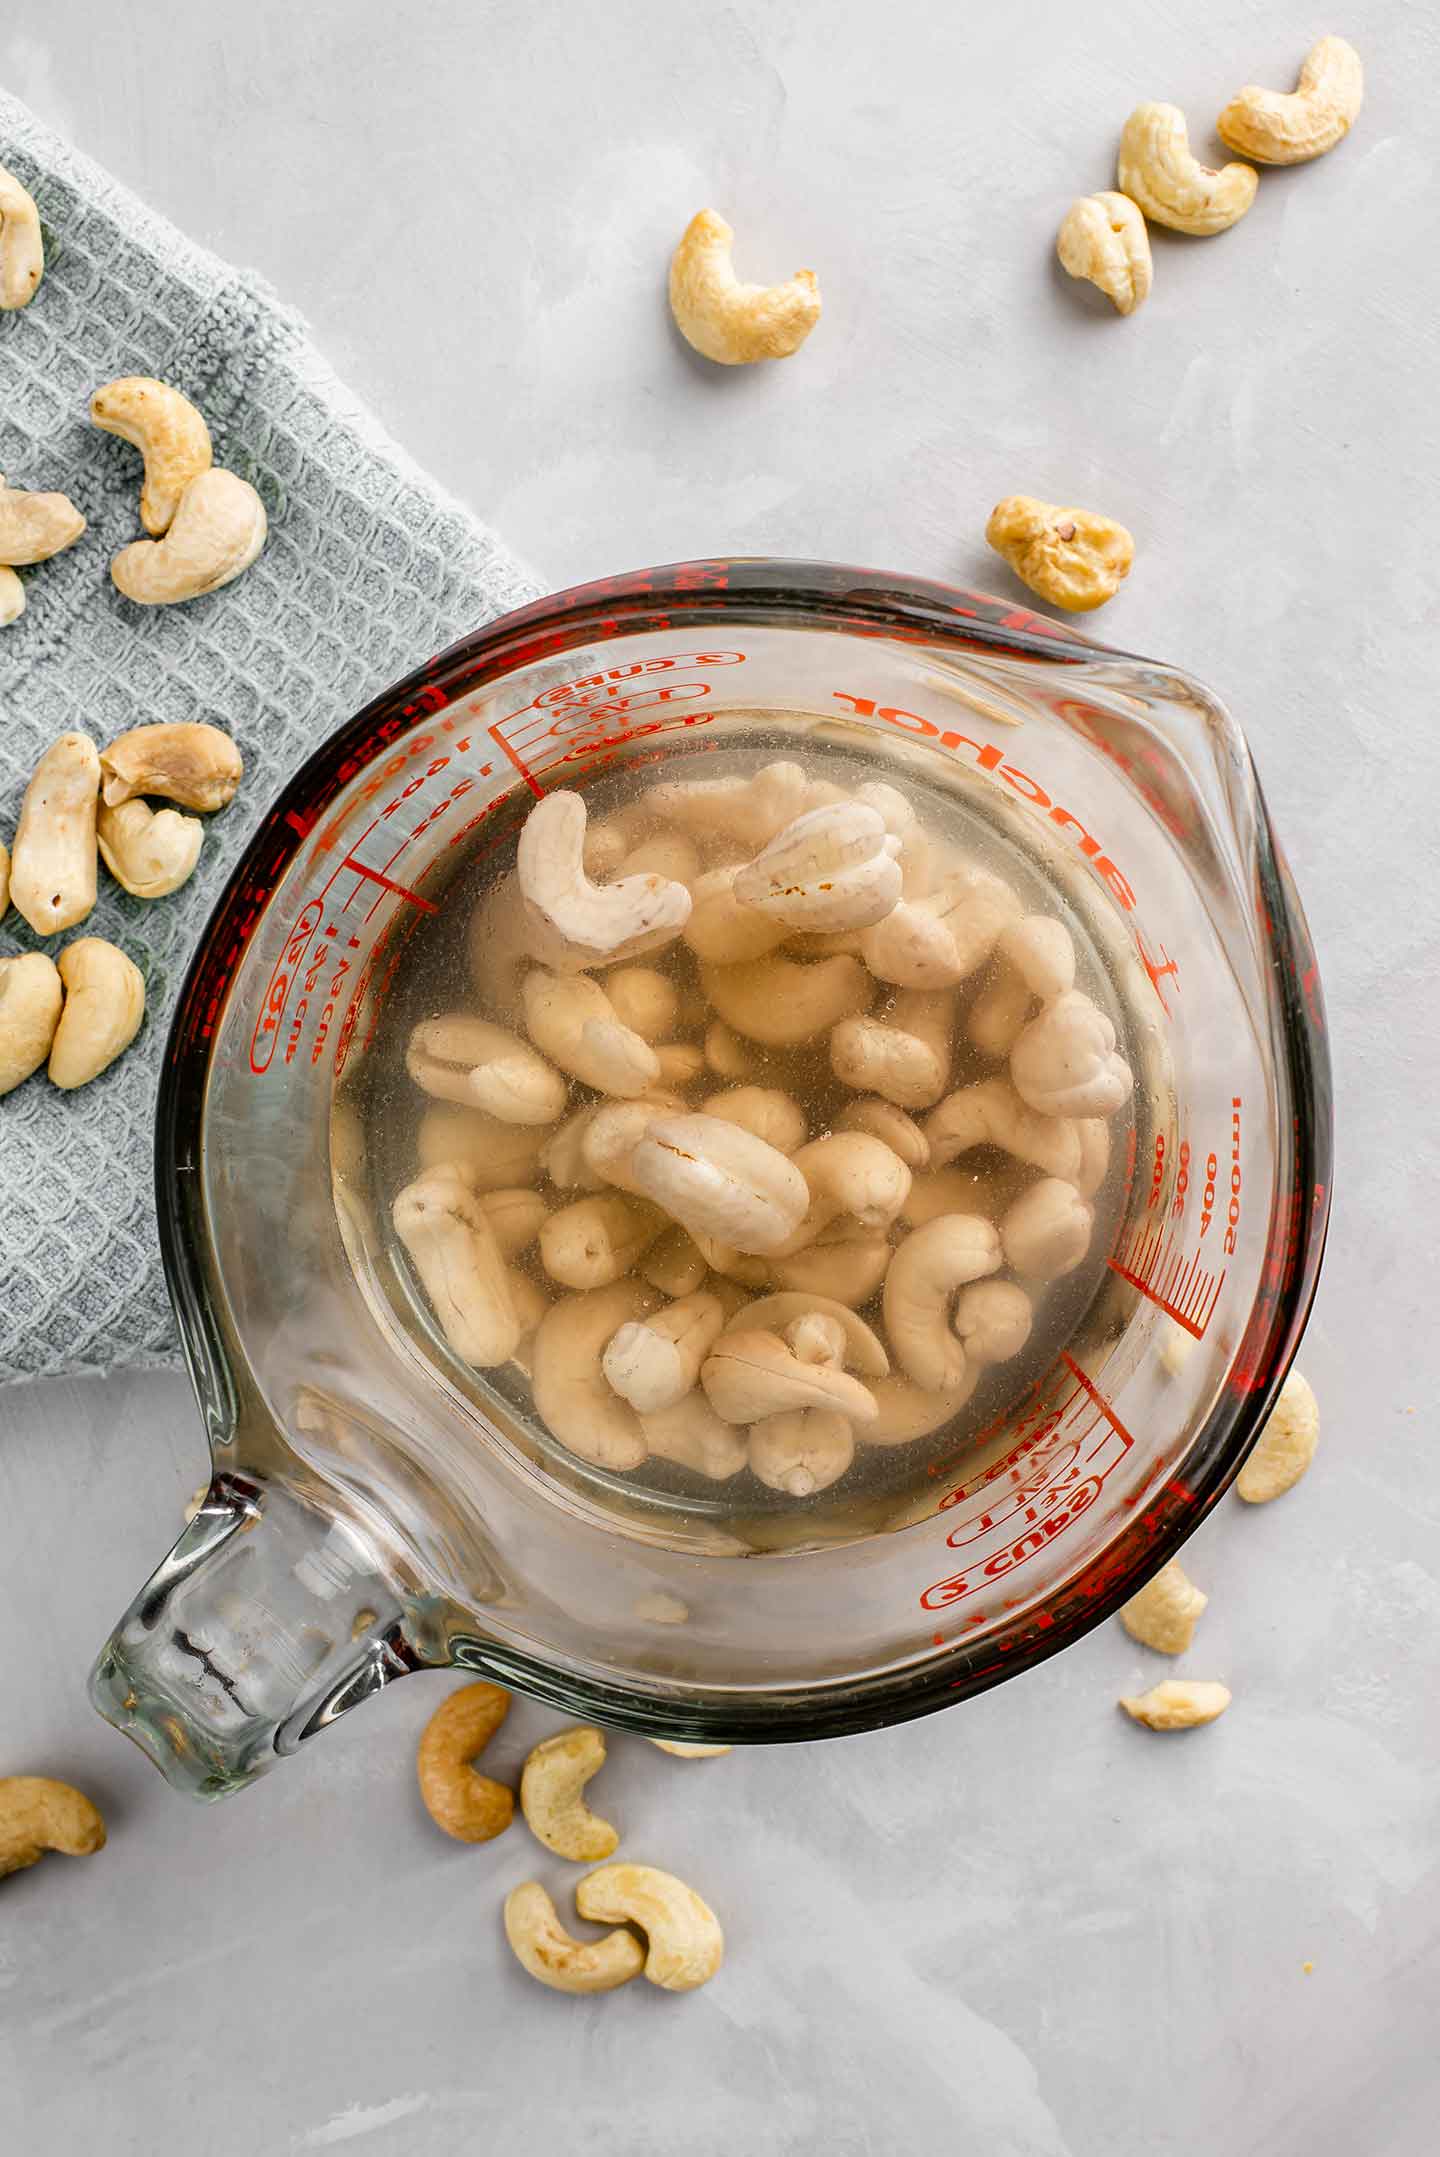 Top down view of cashews soaking in boiling water in a glass measuring cup with raw cashews scattered around.